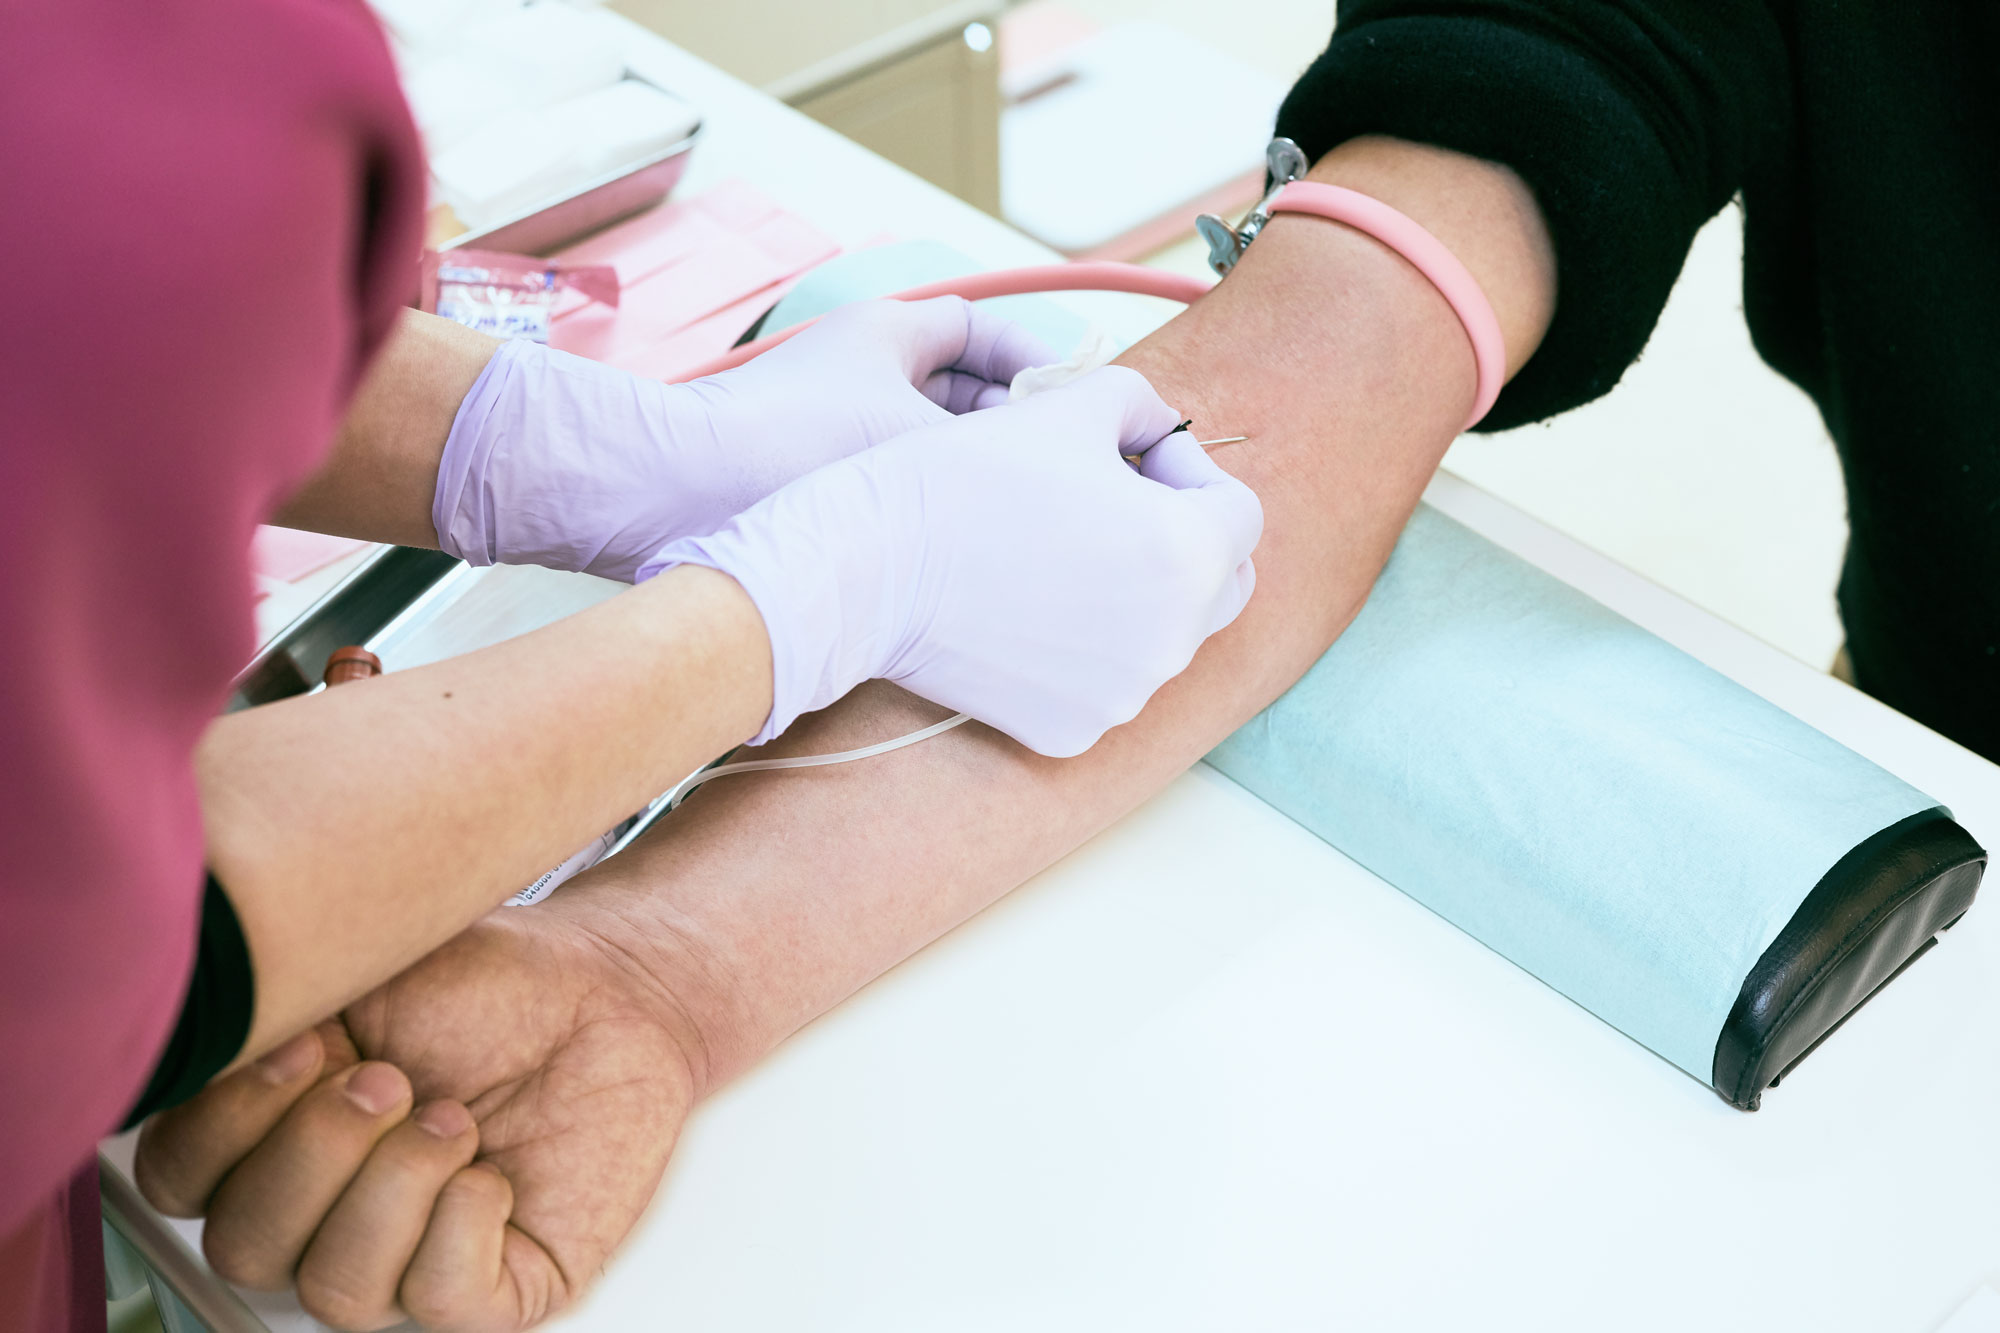 An image of a patient having their blood drawn